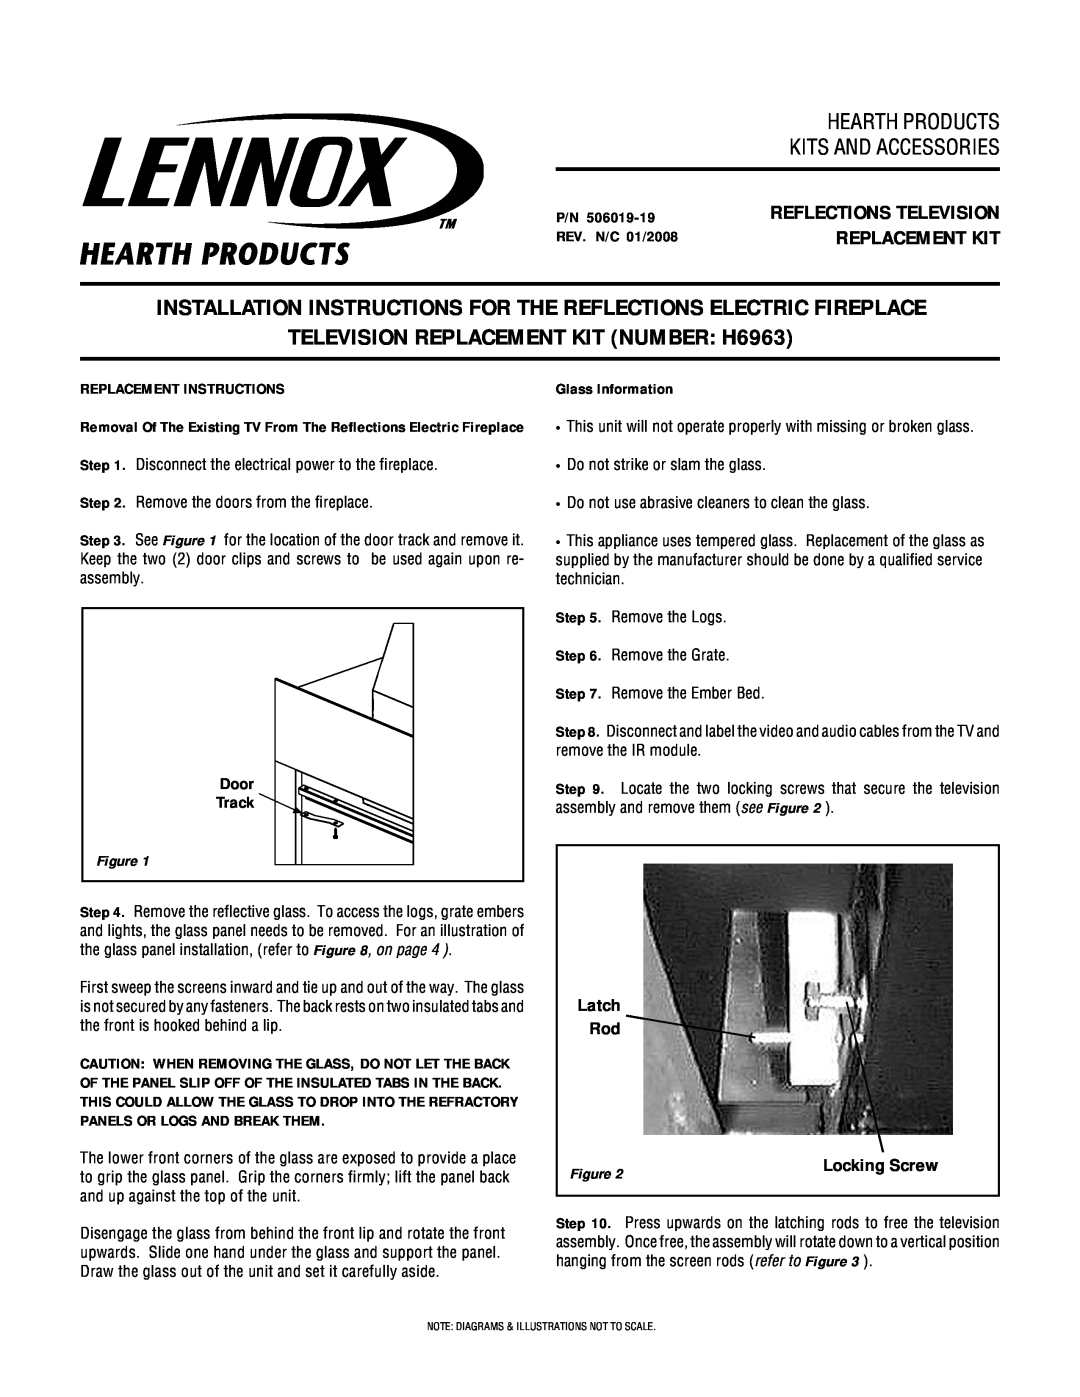 Lennox Hearth installation instructions TELEVISION REPLACEMENT KIT NUMBER H6963, Latch Rod, Replacement Instructions 